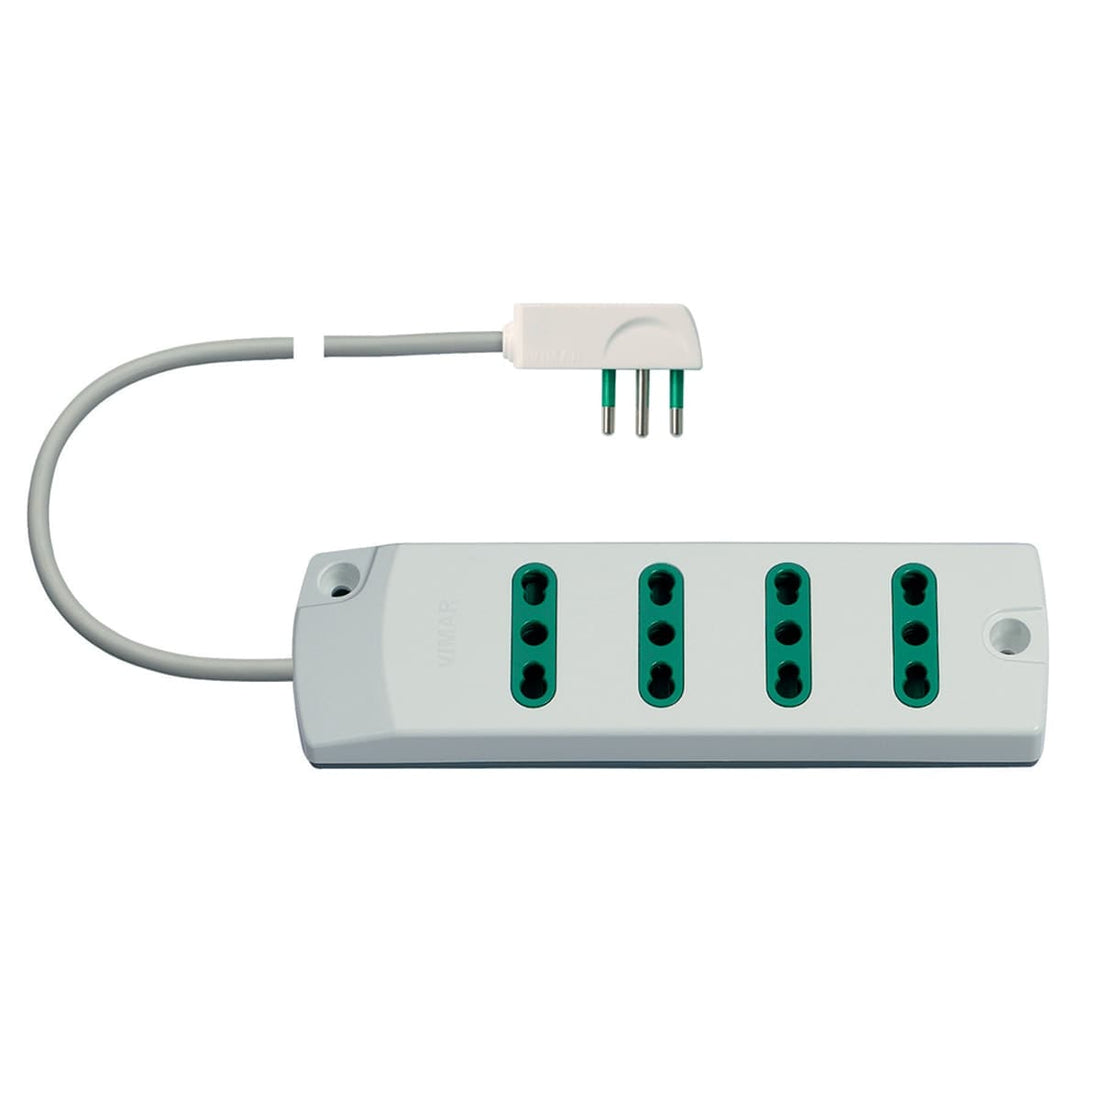 MULTISOCKET PLUG 16A 4 SOCKETS 2-PIN 10/16A CABLE 1.5MT WHITE - best price from Maltashopper.com BR420110404